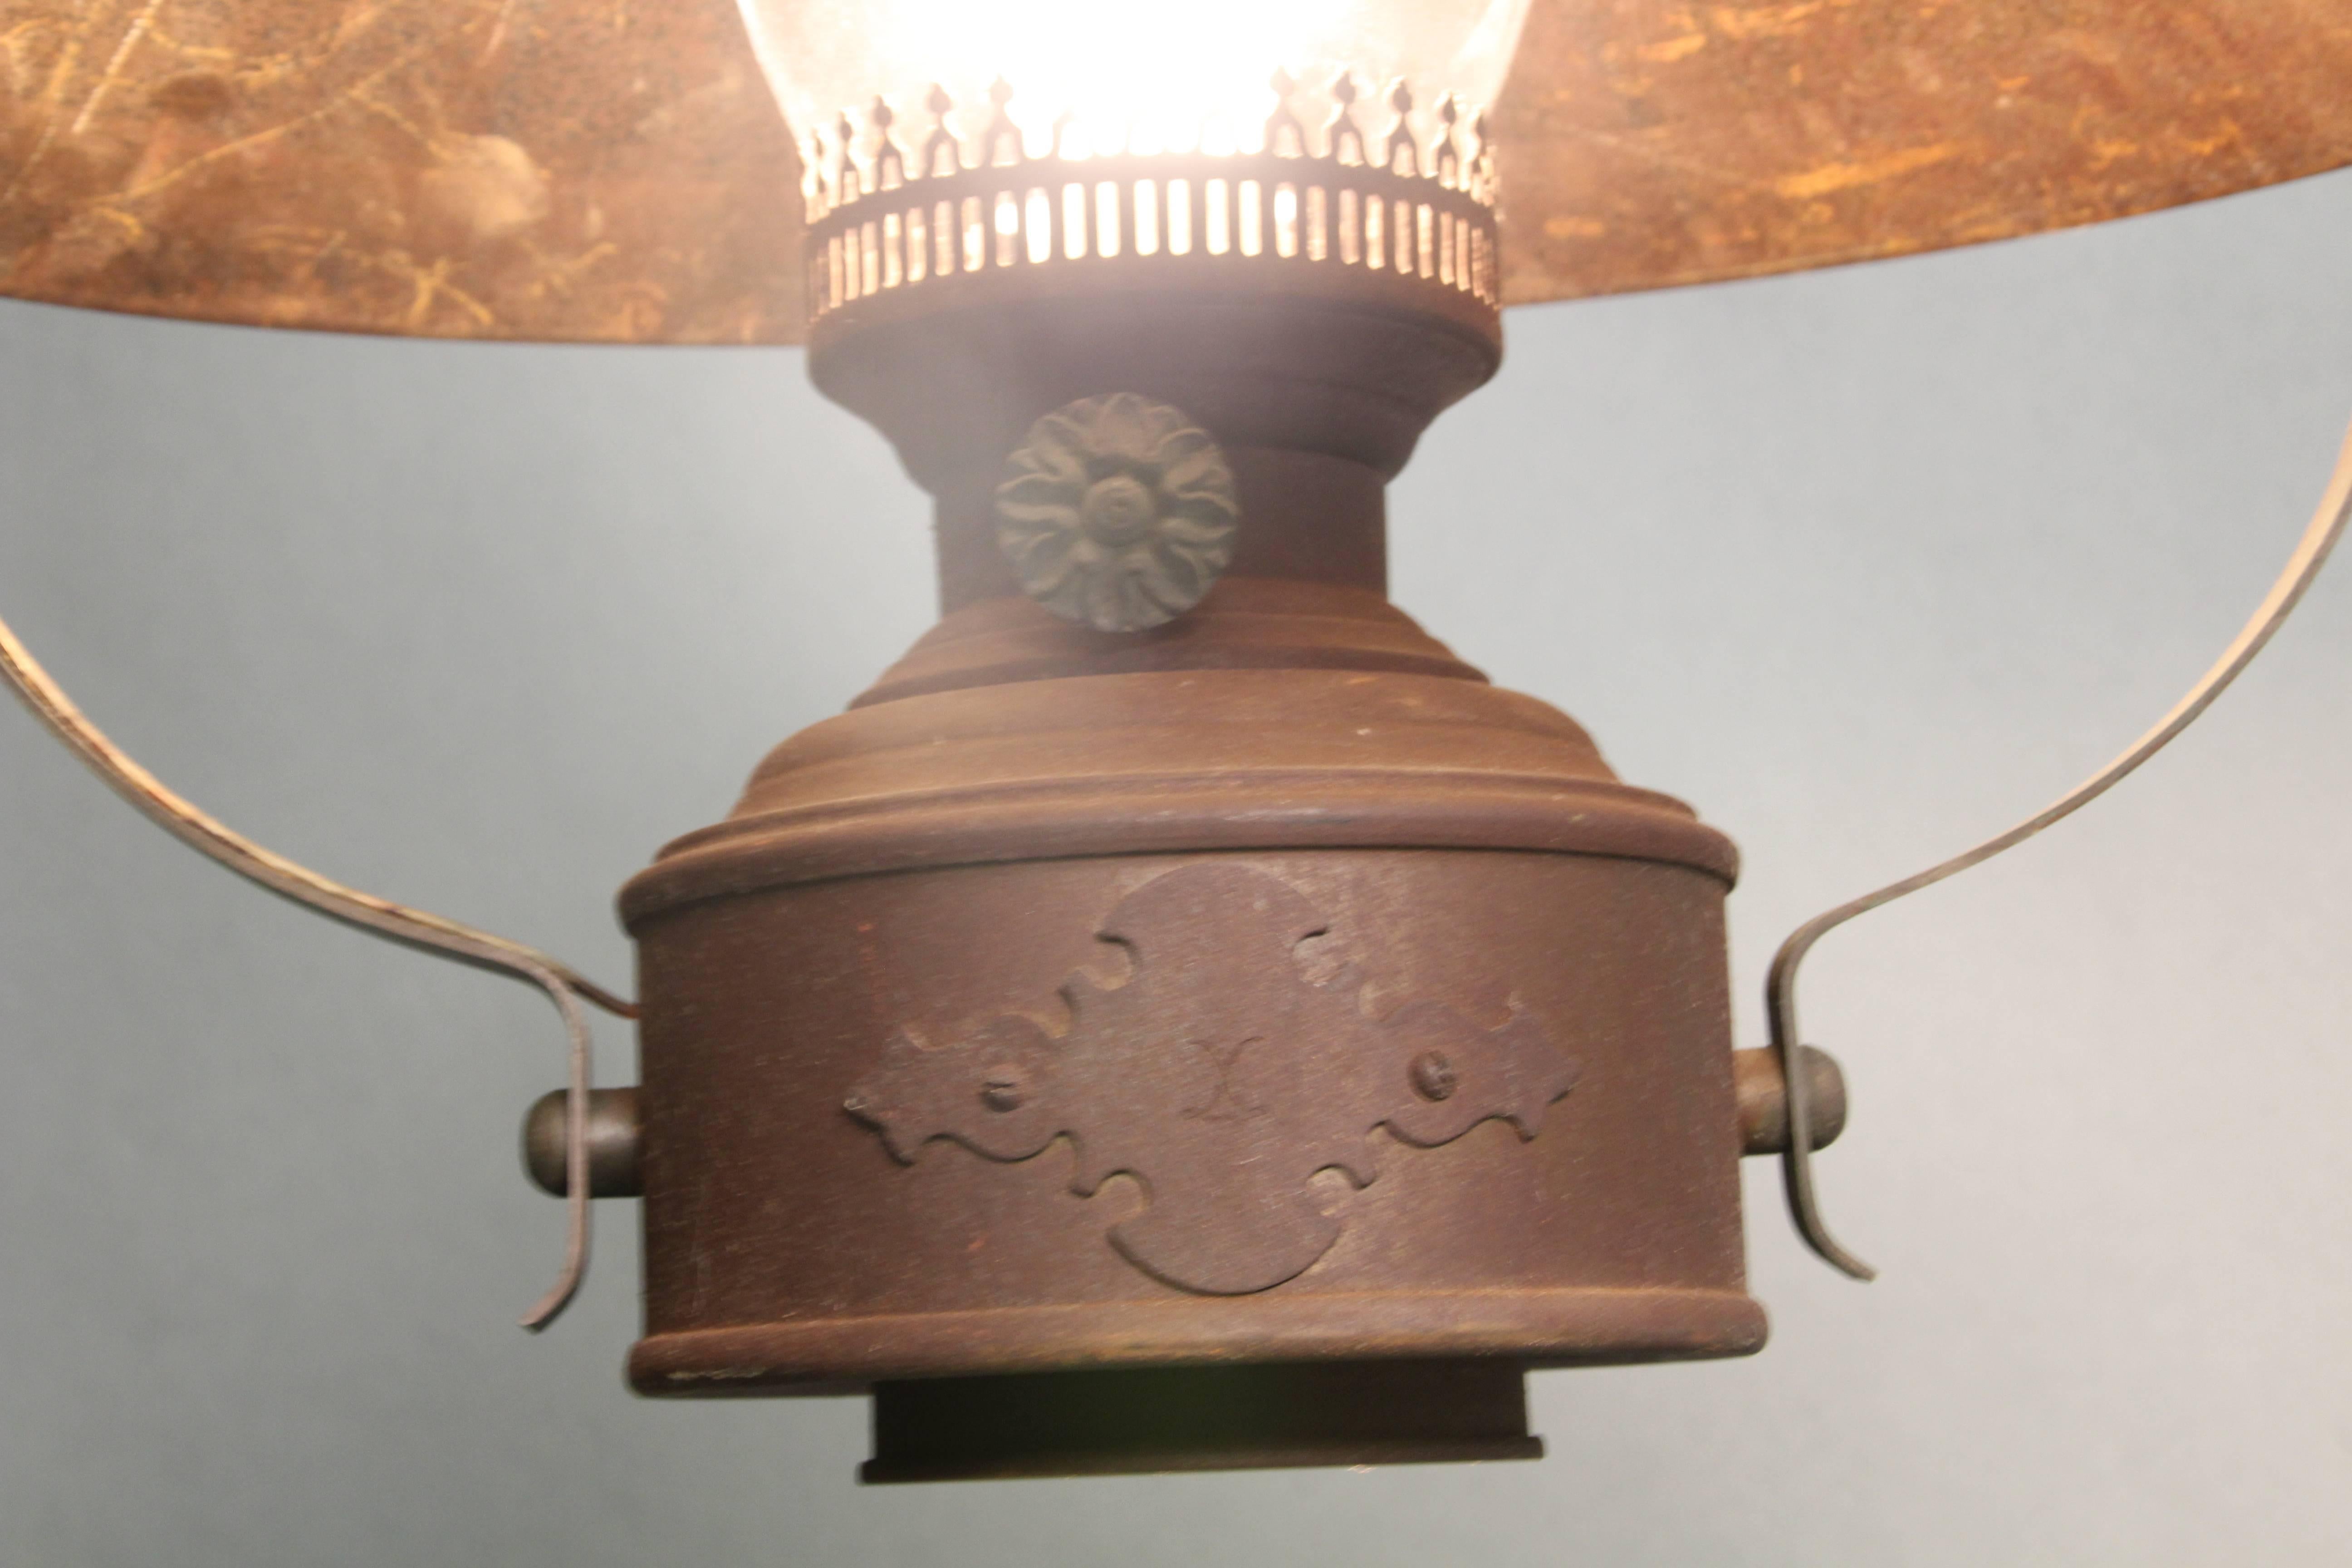 1920s lantern with hurricane glass fits well with early California Rancho Monterey Furniture.